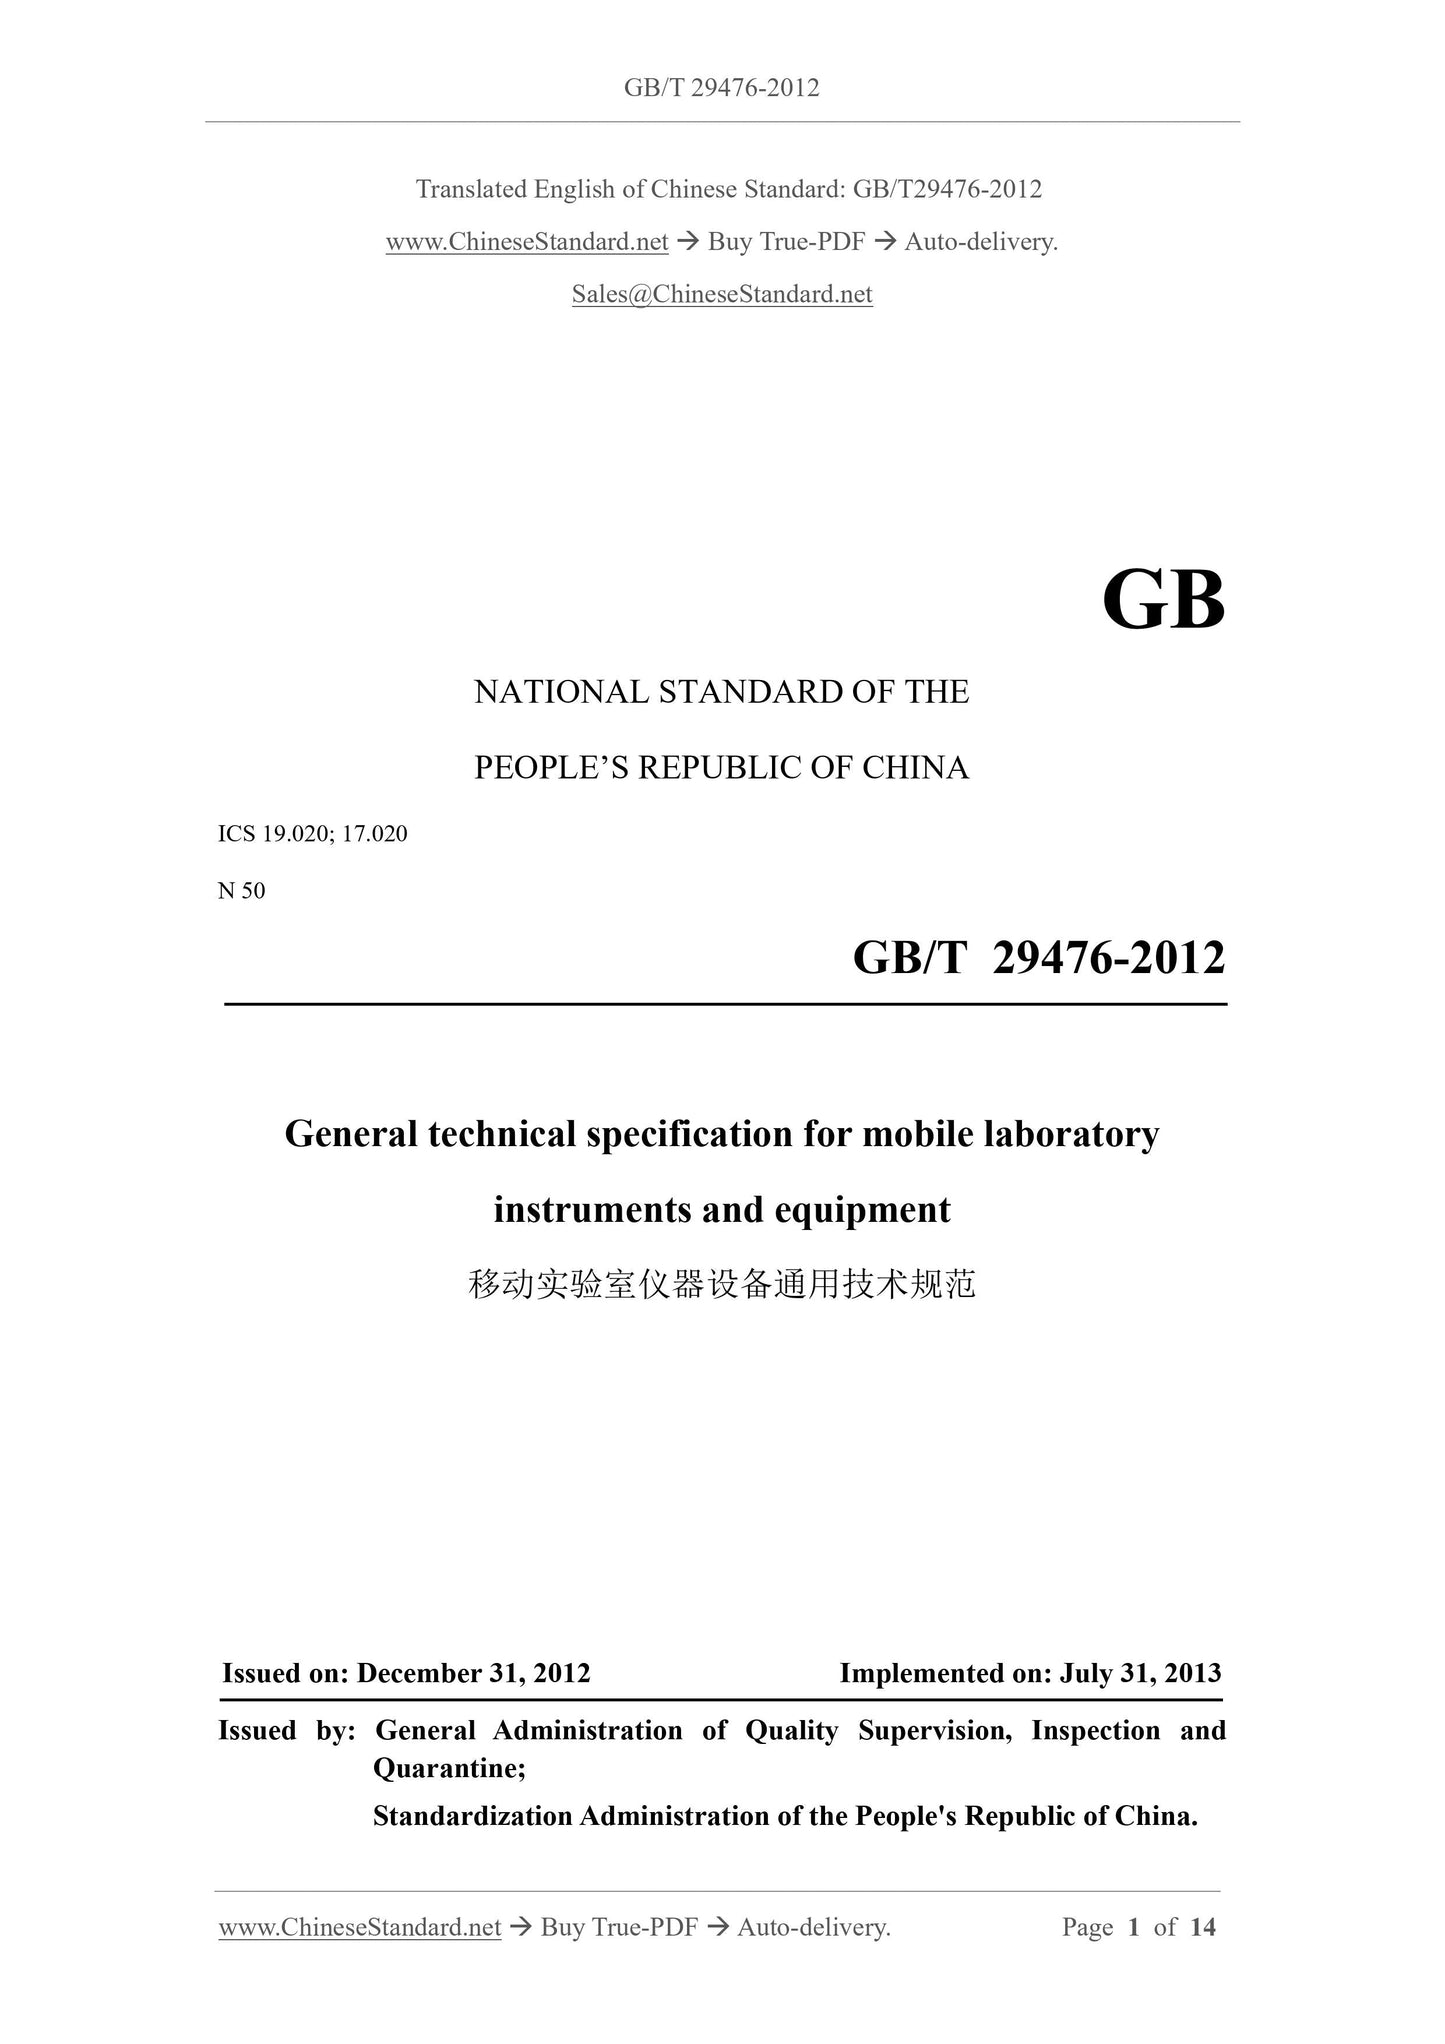 GB/T 29476-2012 Page 1